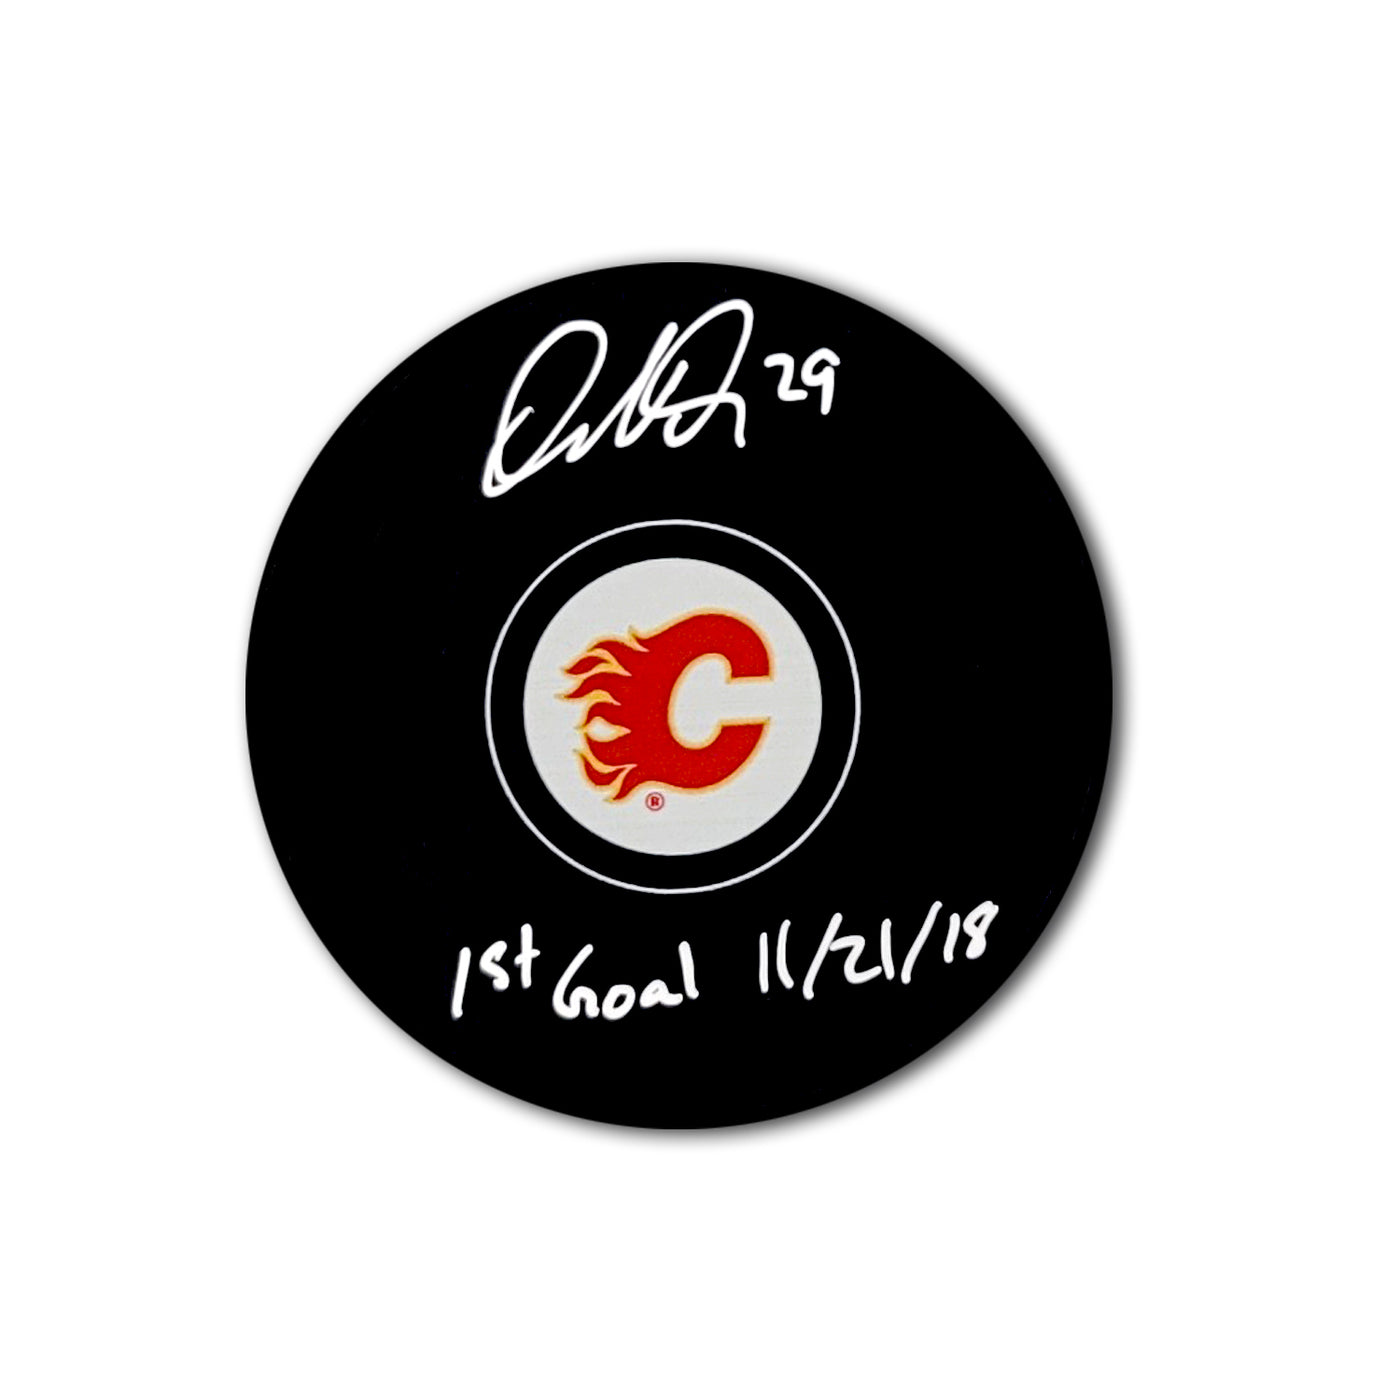 Dillon Dube Calgary Flames Autographed Hockey Puck Inscribed 1st Goal 11/21/18